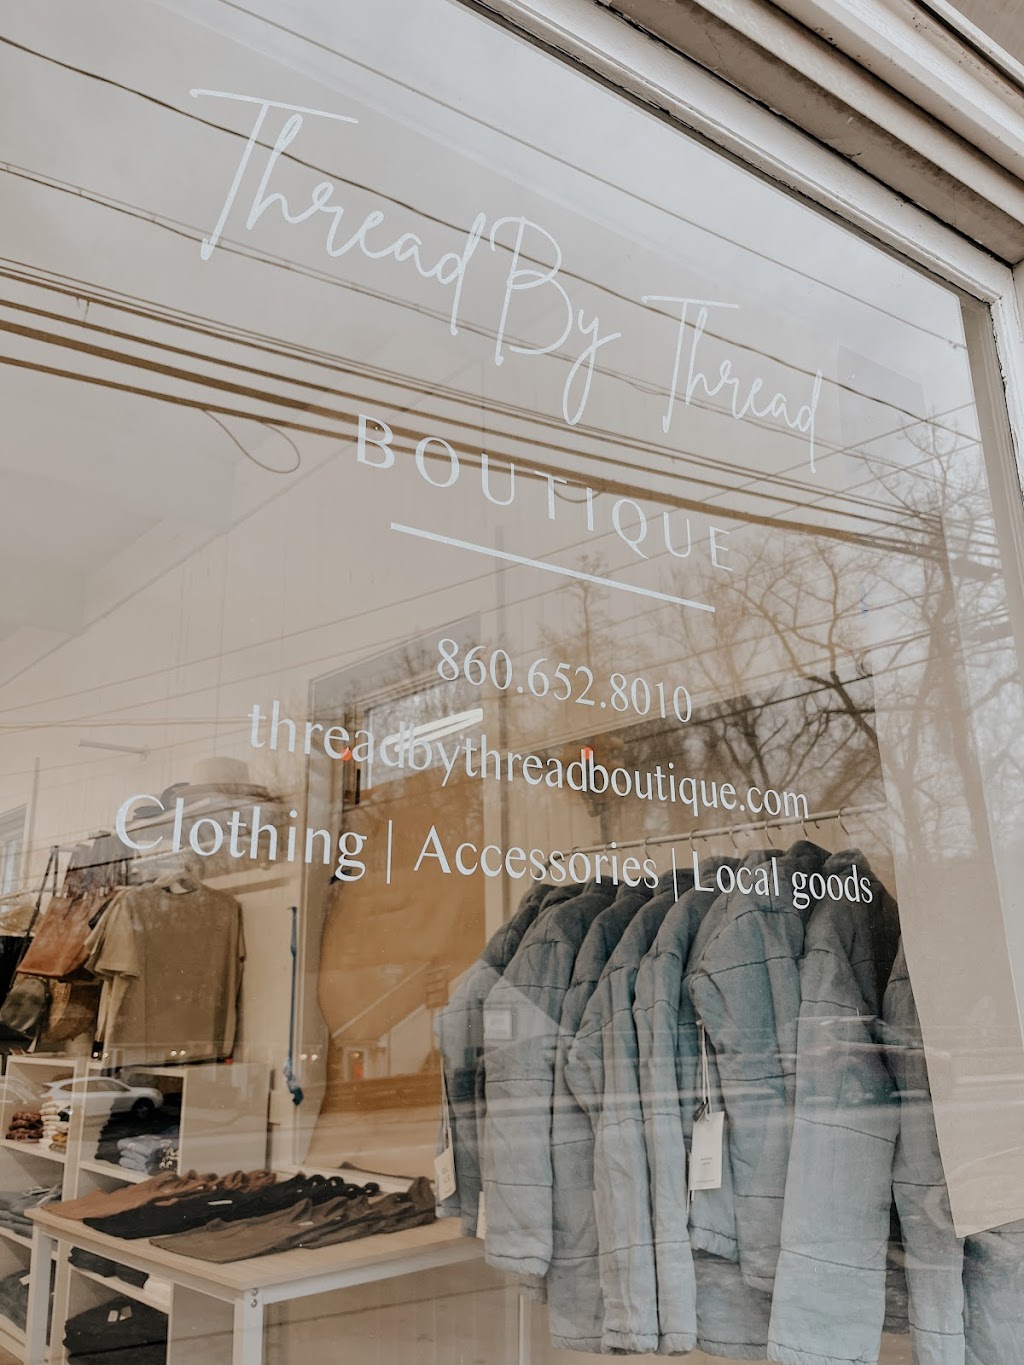 Thread By Thread Boutique | 862 Main St, South Glastonbury, CT 06073 | Phone: (860) 652-8010